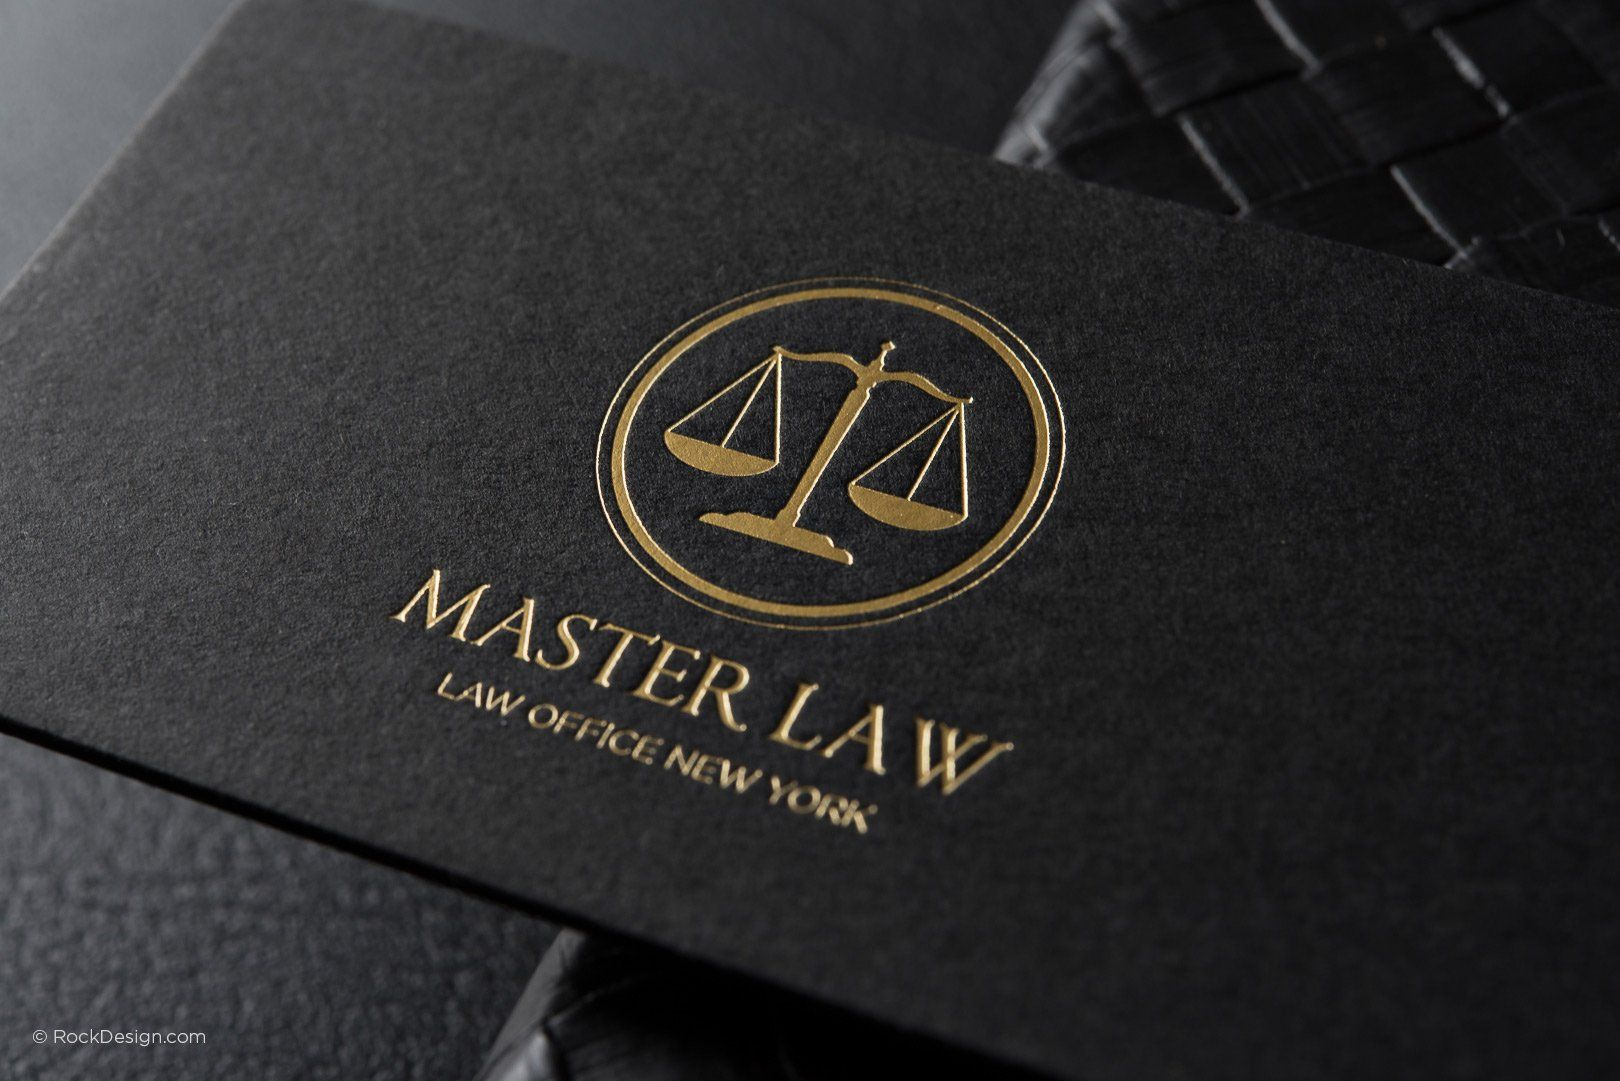 Free Lawyer Business Card Template | Rockdesign | Lawyer Throughout Legal Business Cards Templates Free